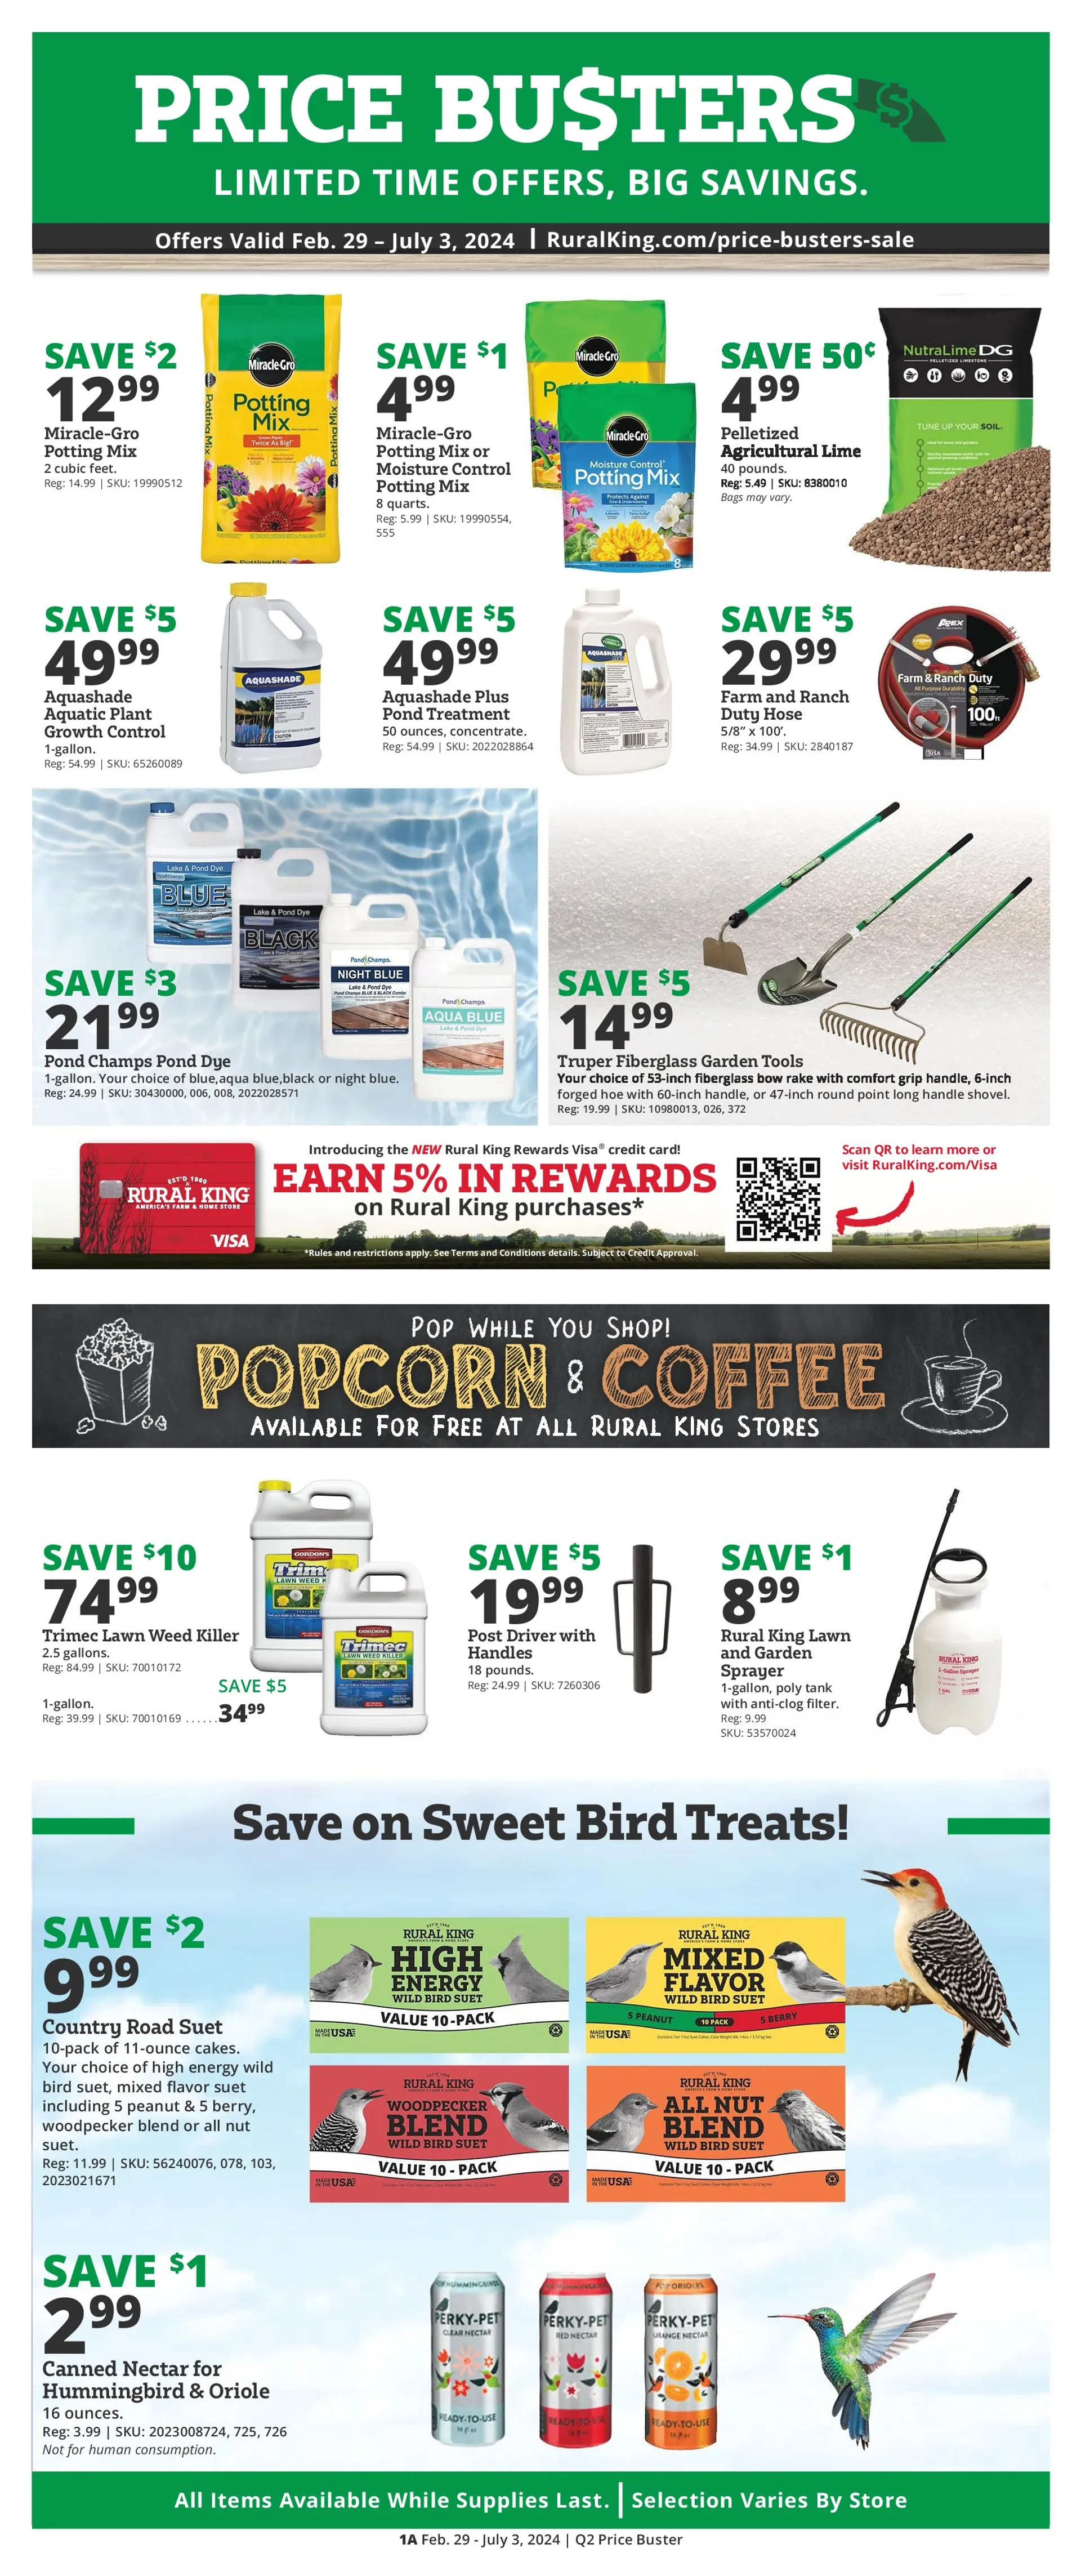 Weekly ad RURAL KING SALES from February 29 to July 3 2024 - Page 